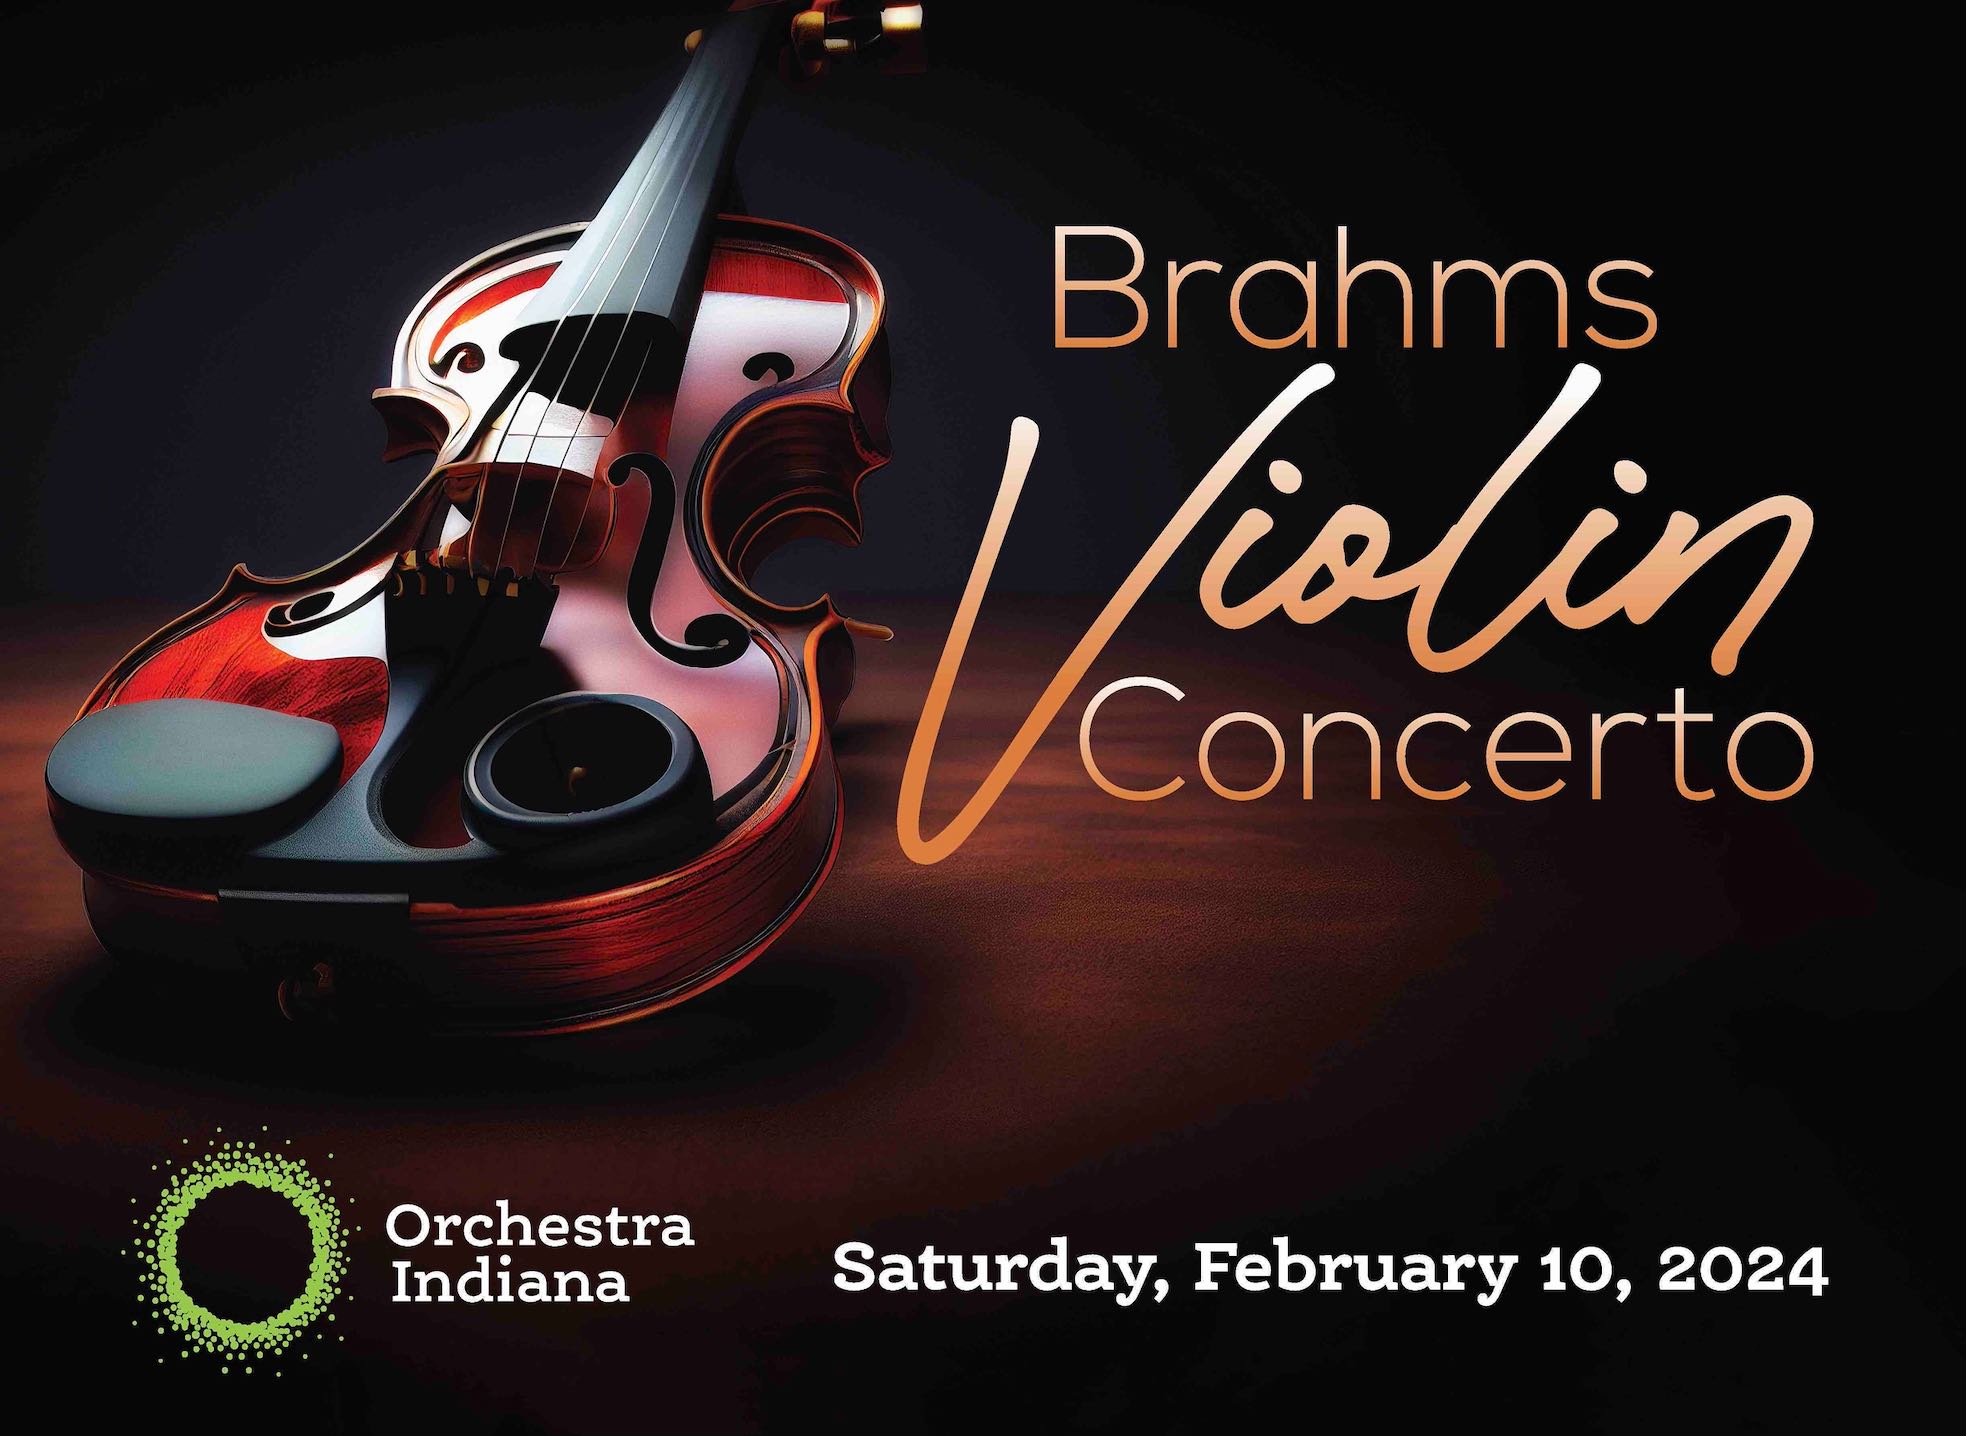 The title "Brahms Violin Concerto" next to a violin and above the Orchestra Indiana logo and the date Saturday, February 10, 2024